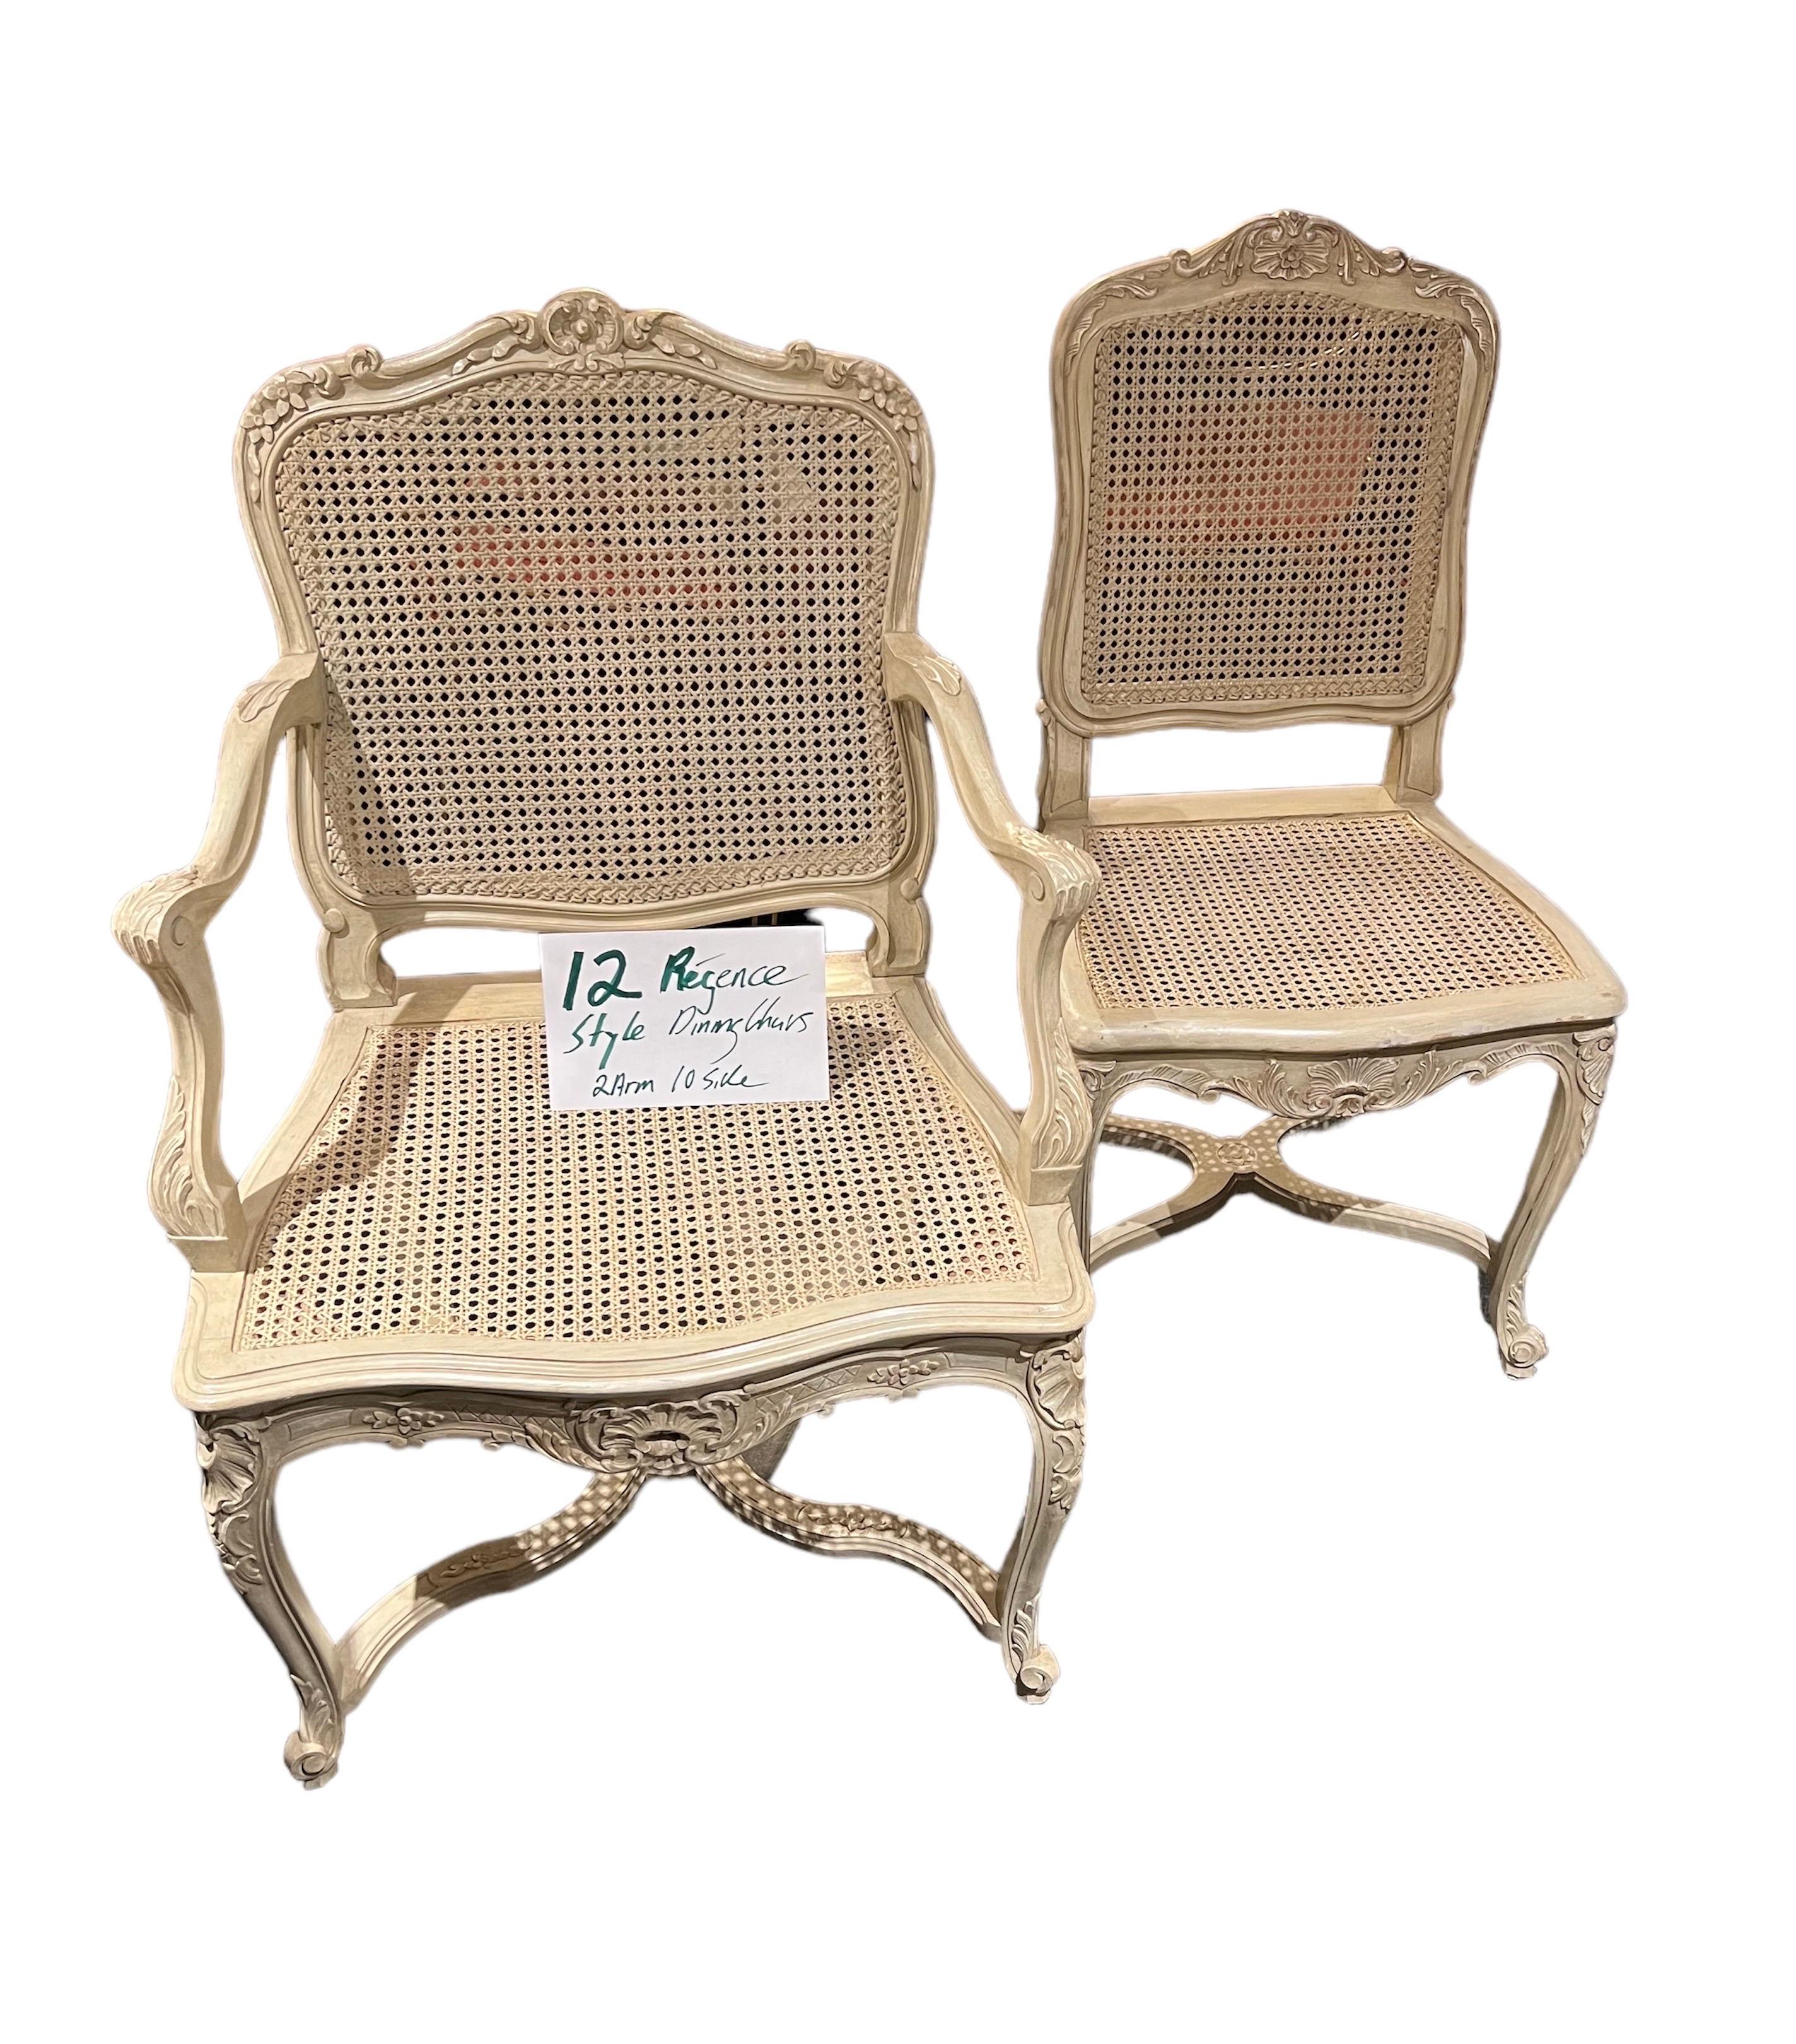 Caned & Painted Régence Style Chairs, 2 Arm 10 Side  For Sale 12